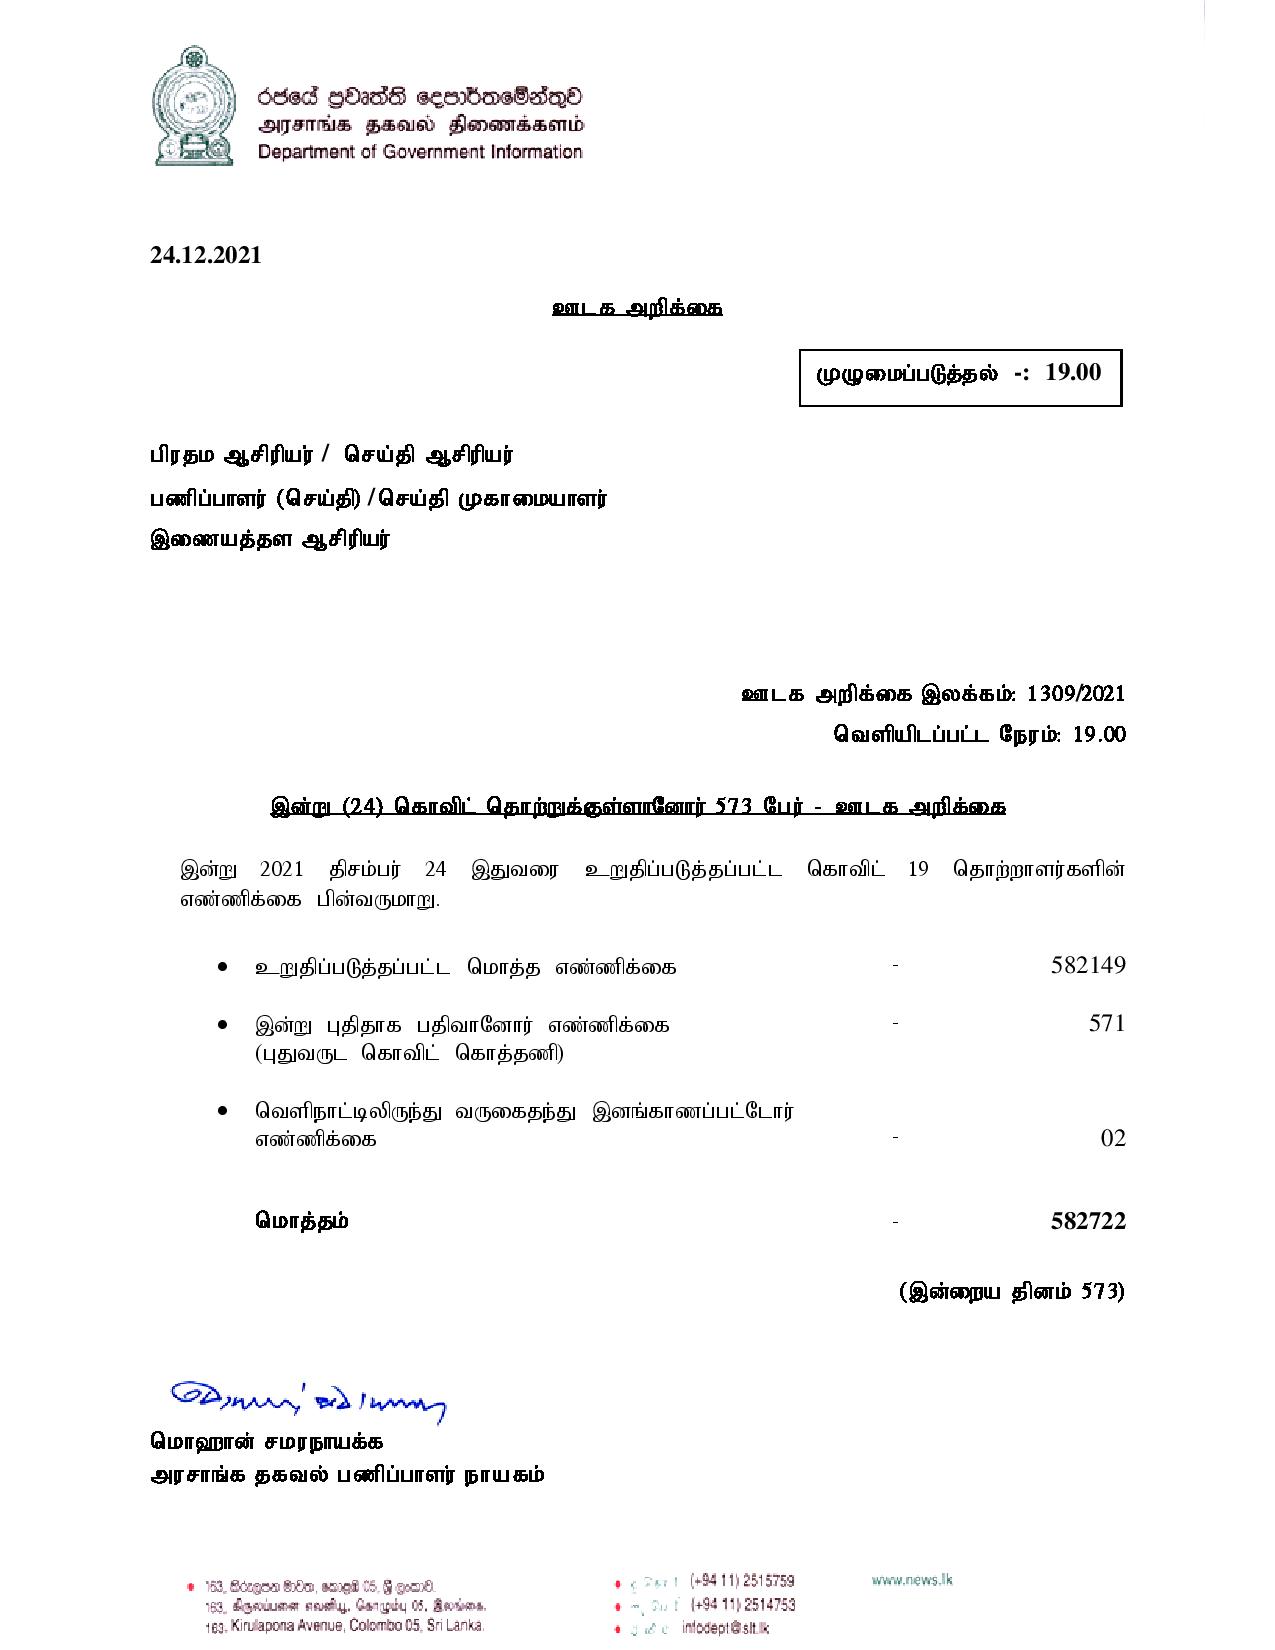 Release No 1309 Tamil page 001